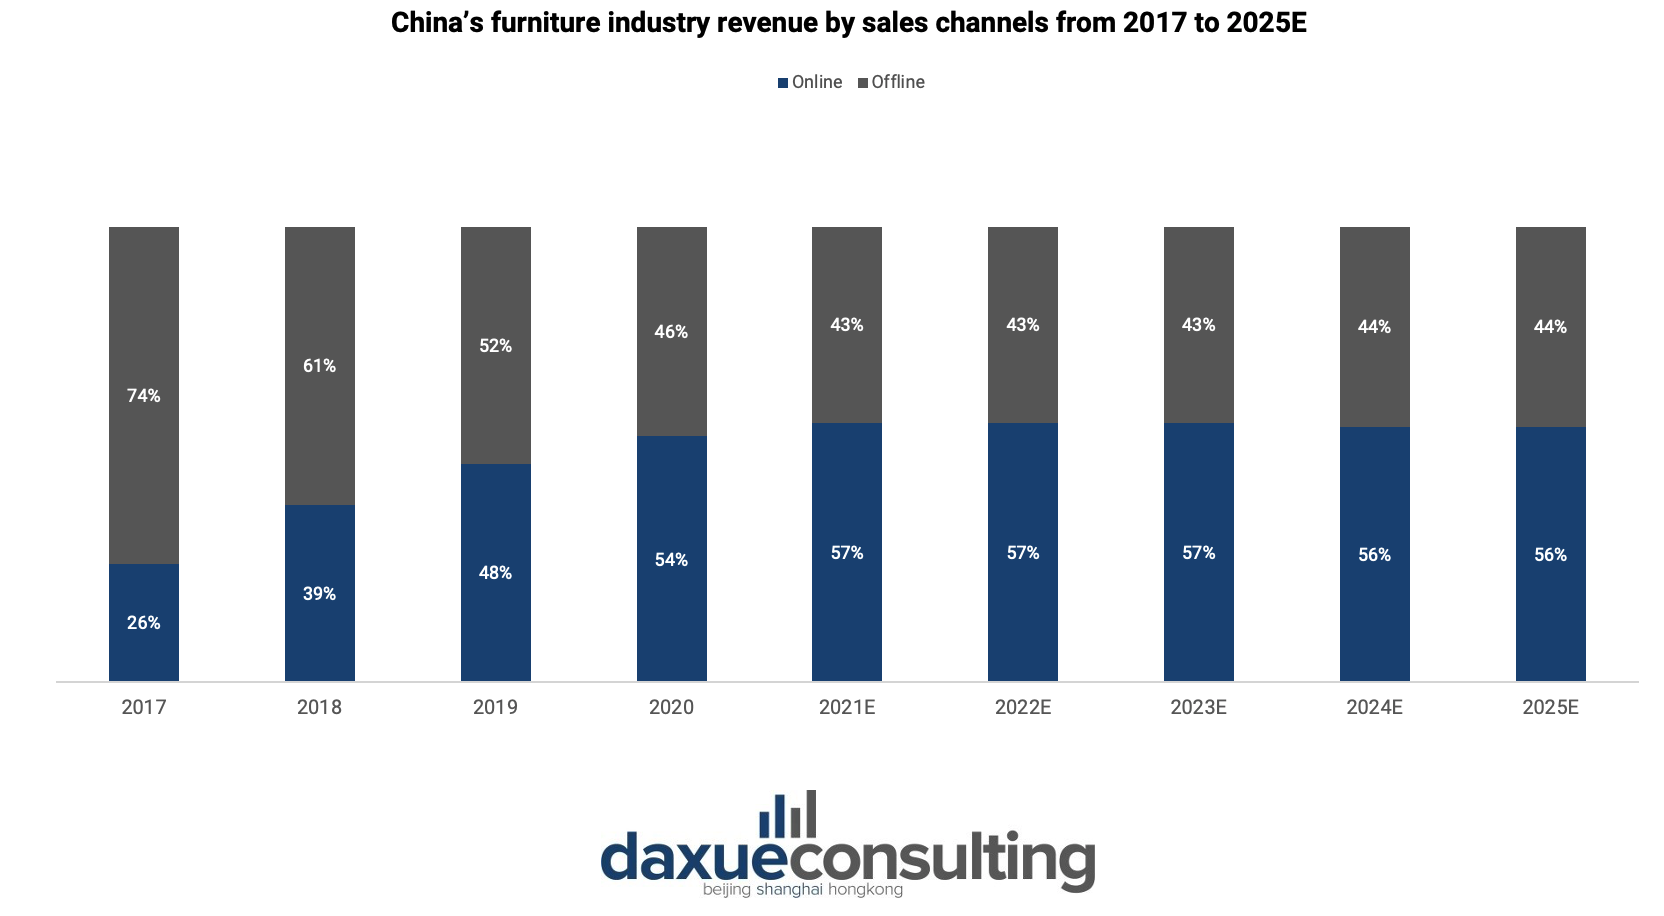 China’s furniture industry revenue by sales channels